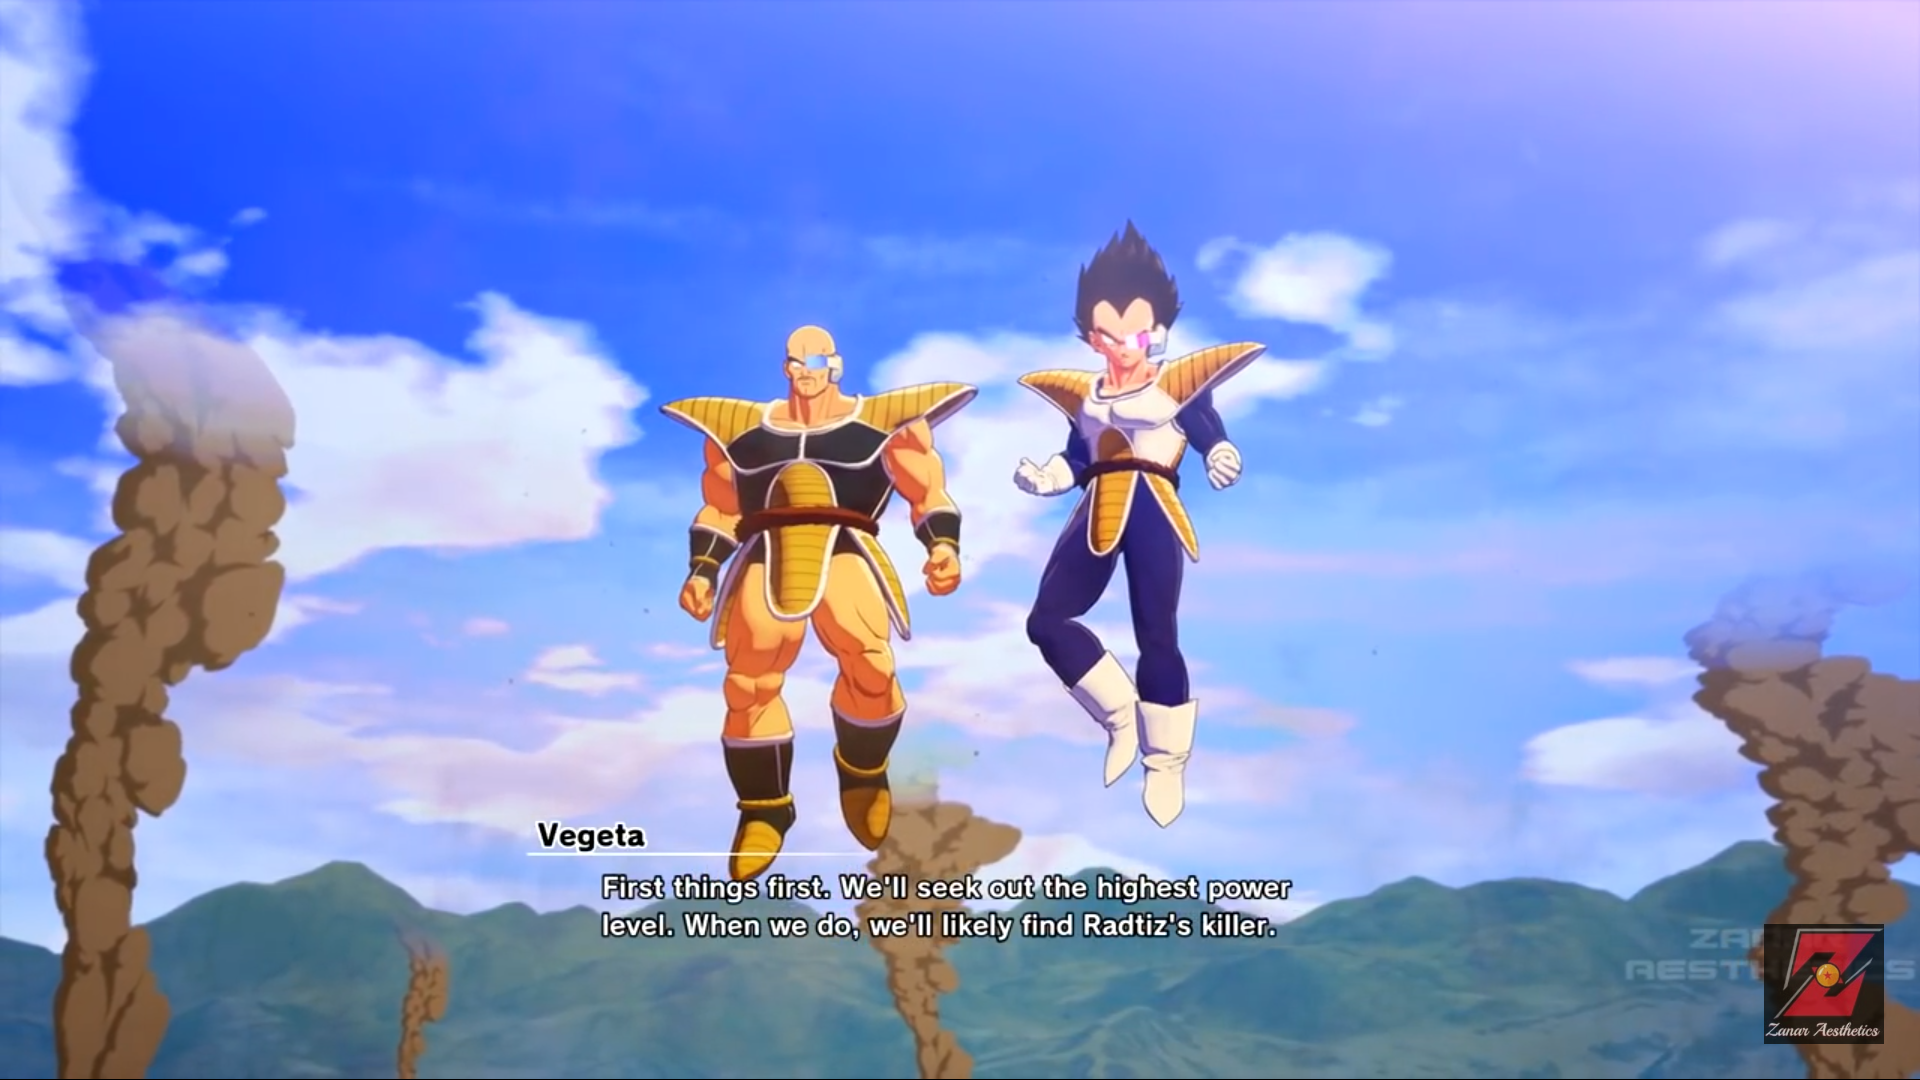 Are spelling mistakes common in this game? First Kakarot clip I watched and I noticed this